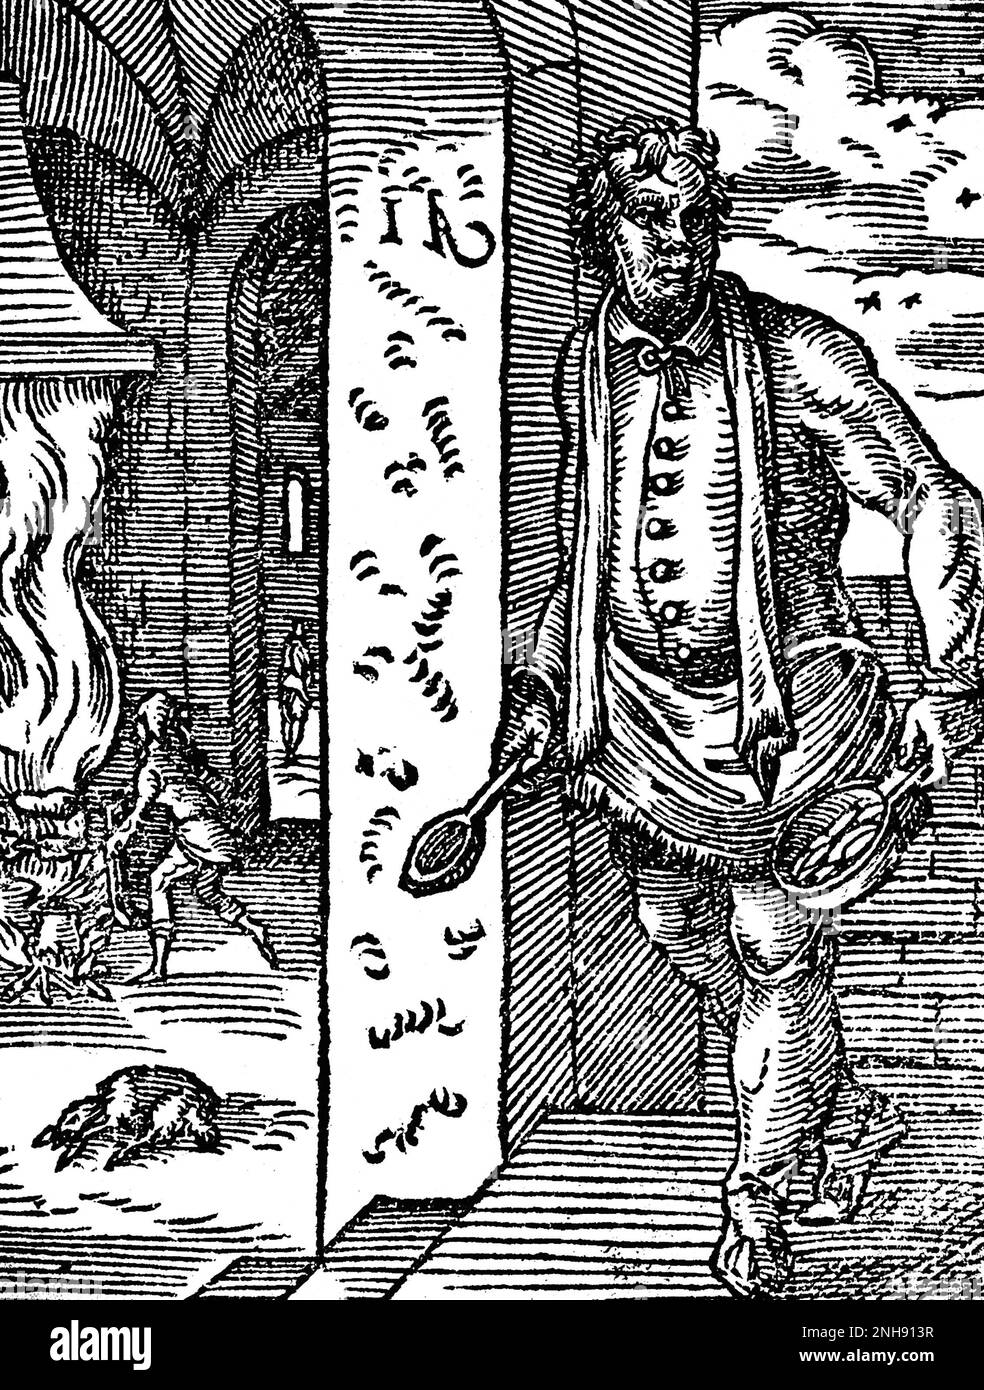 A cook holding a saucepan and wooden spoon, while in the background another cook roasts meat on a spit. Woodcut from Jost Amman's Book of Trades, 1568. Stock Photo